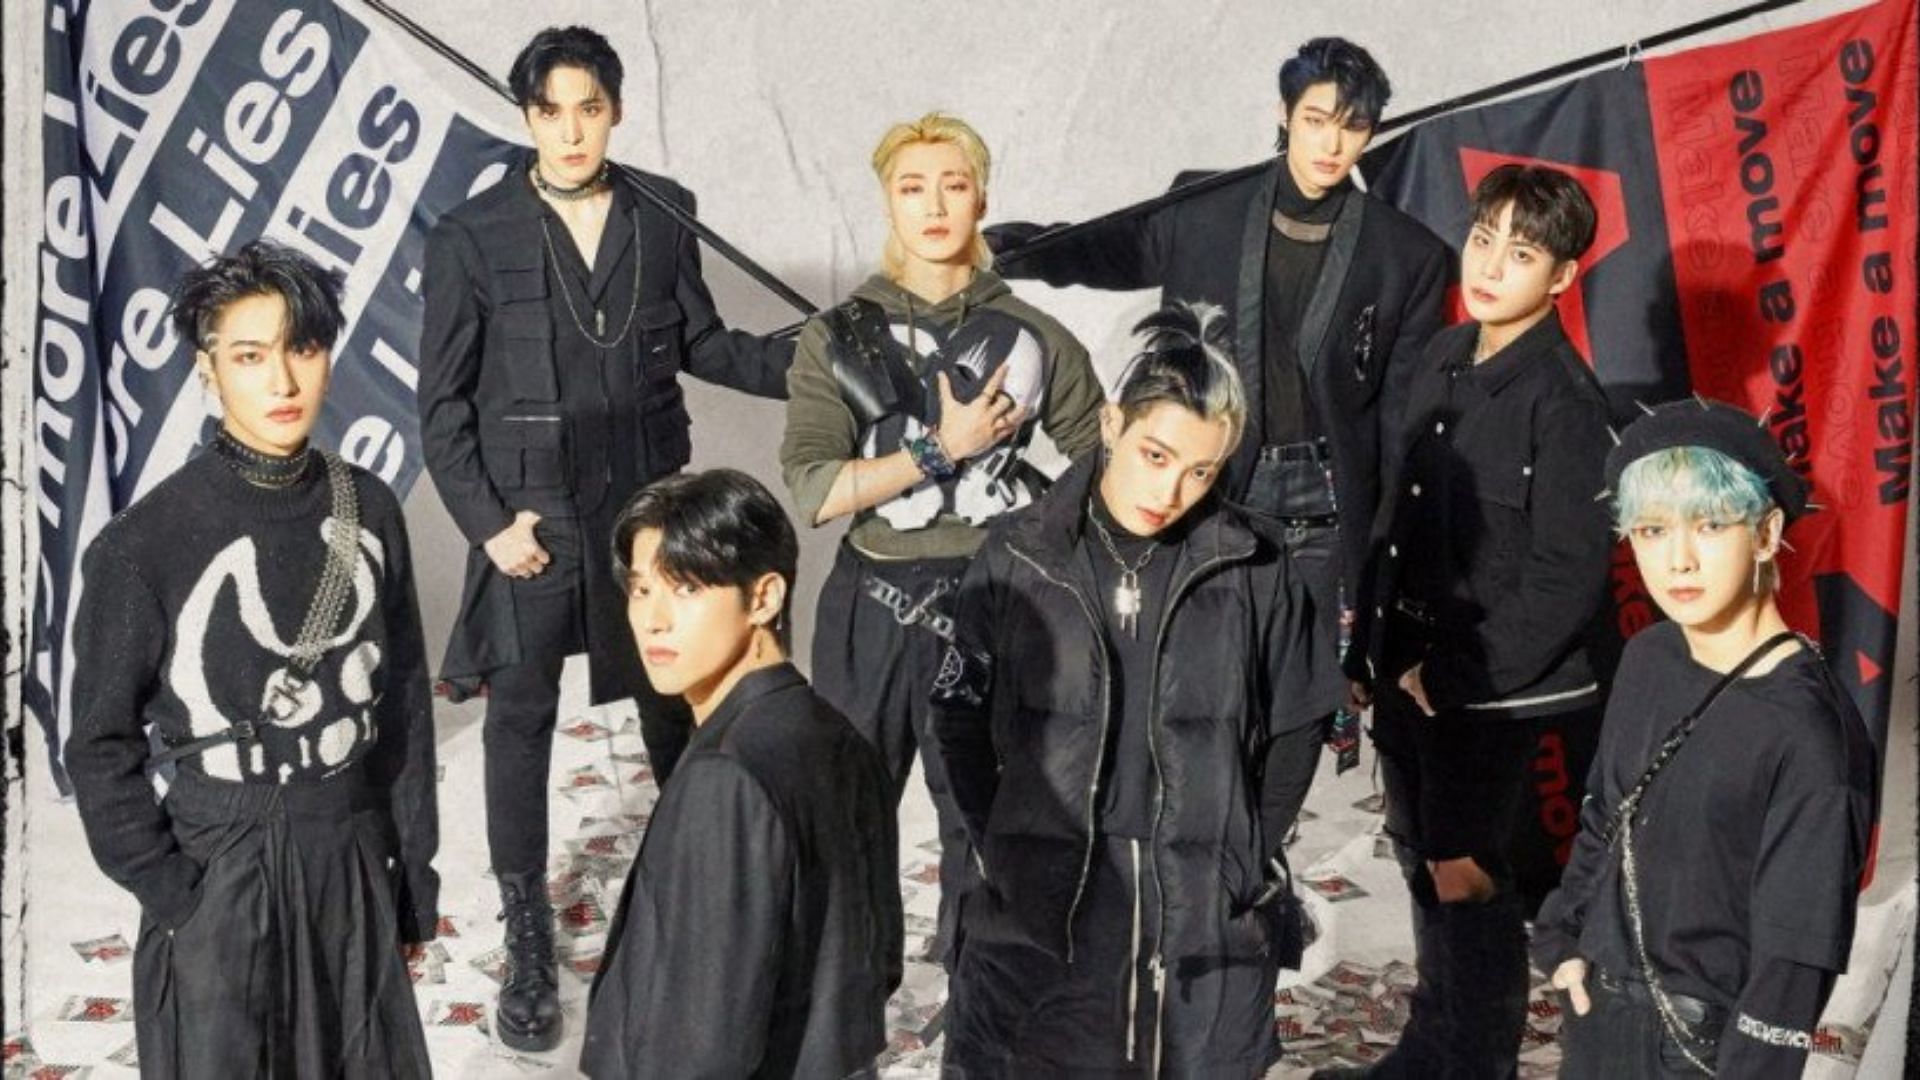 Korean fans bring attention to ATEEZ's popularity overseas as they